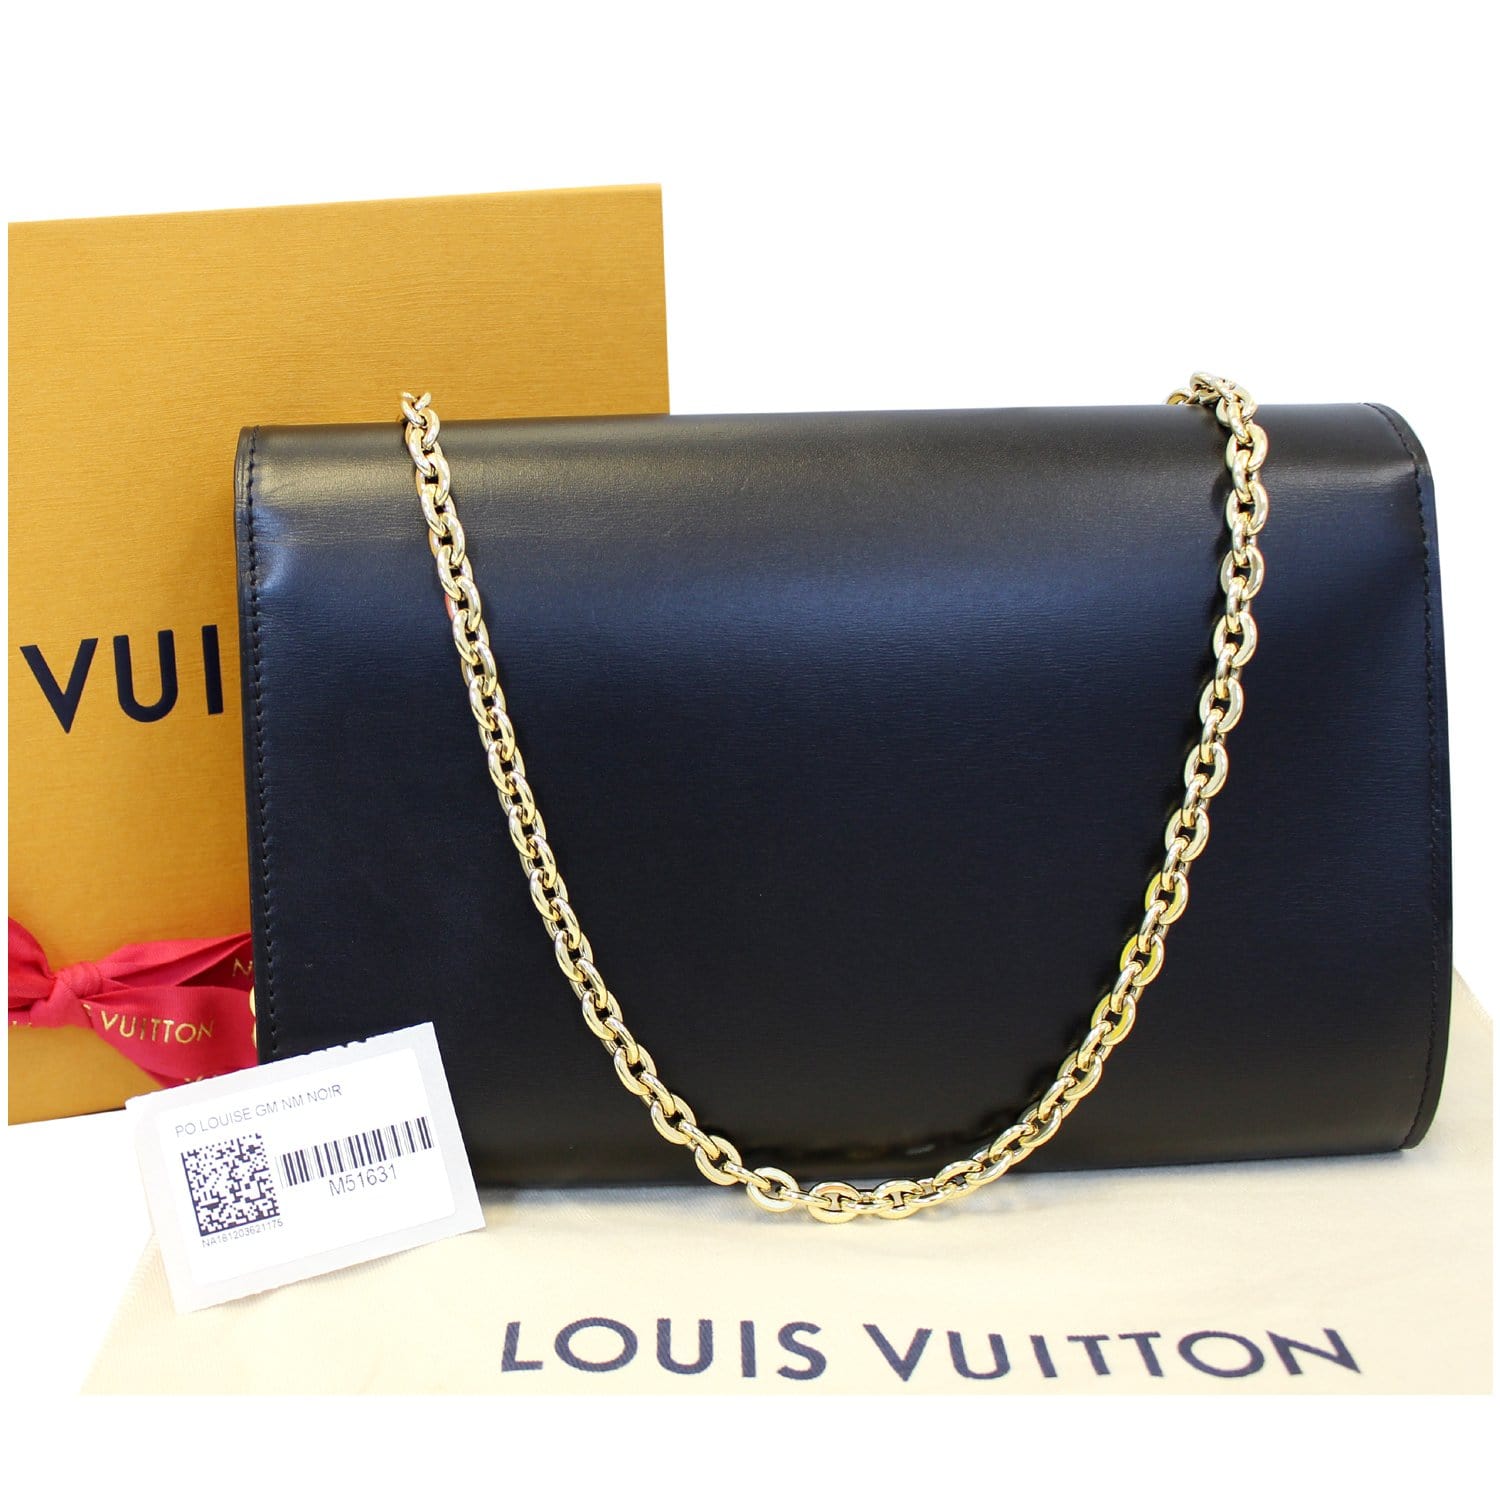 Louise Chain GM Other Leathers - Handbags